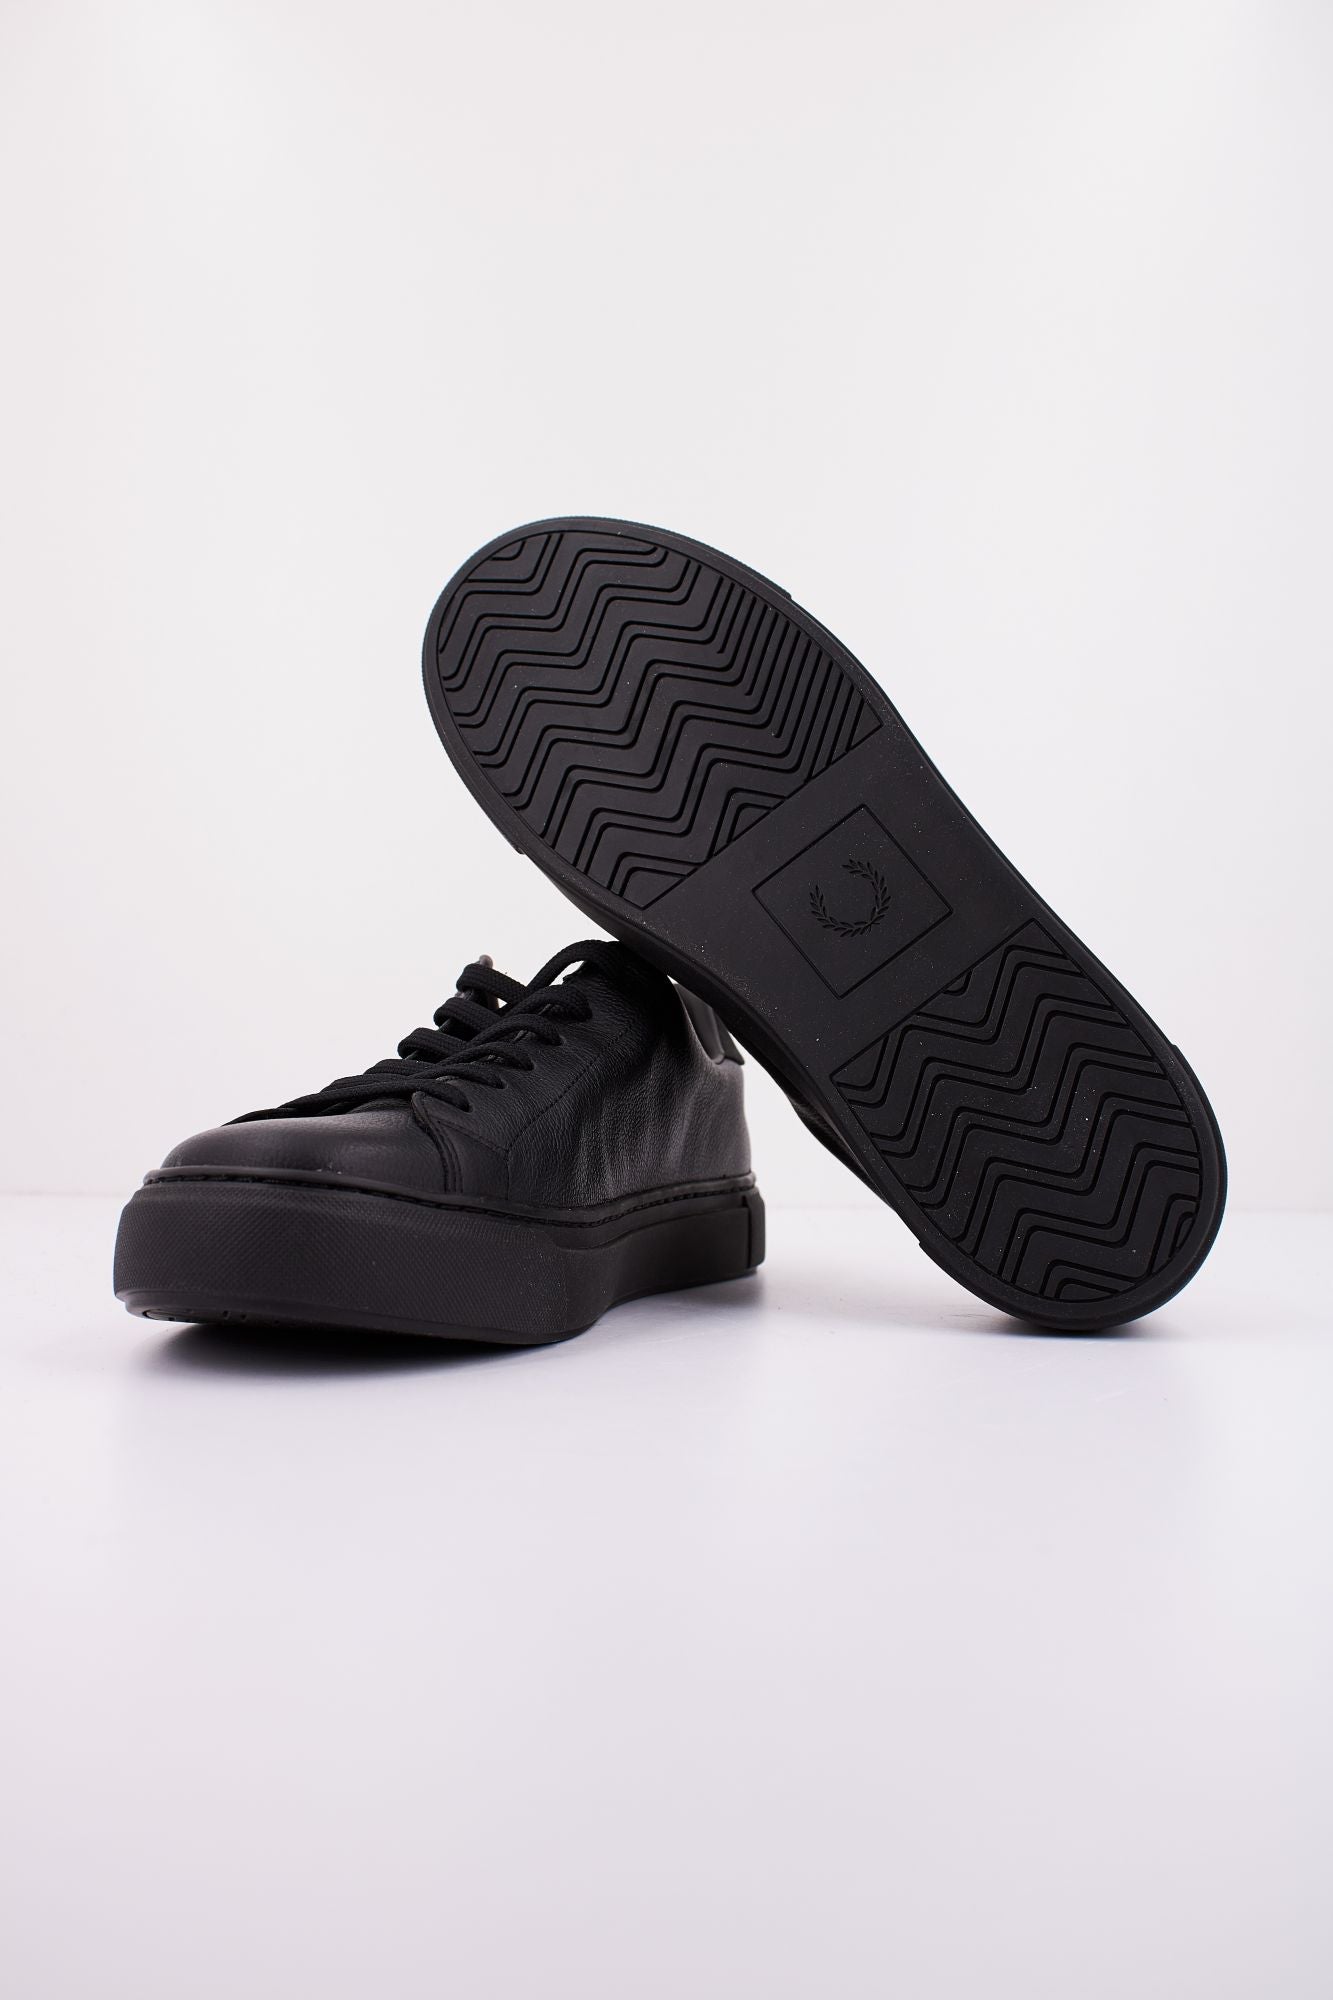 FRED PERRY B71 TUMBLED LEATHER en color NEGRO (4)